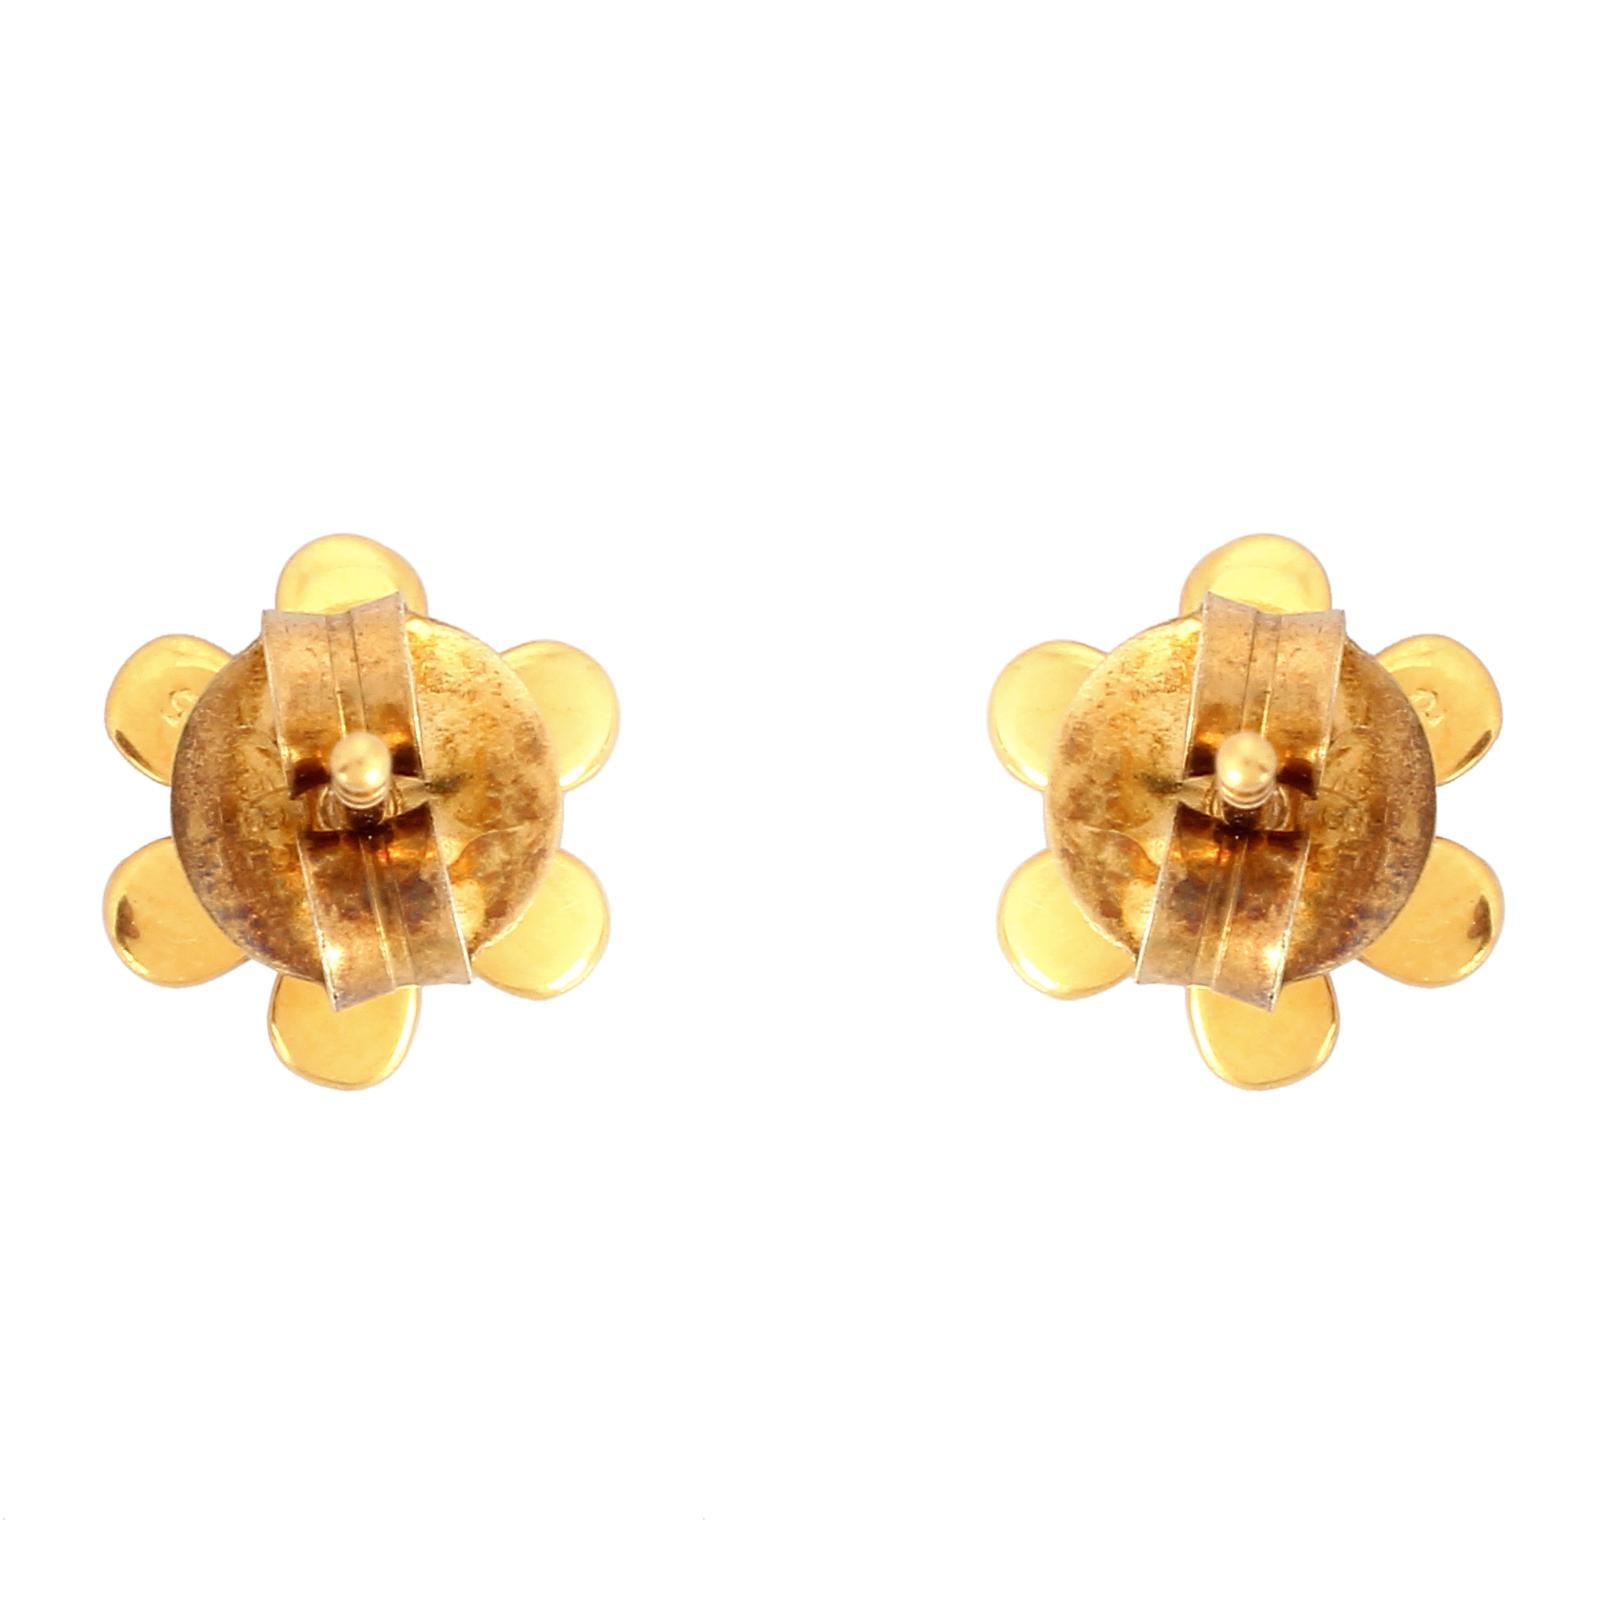 Cast from 18-karat and sterling silver, these beautiful floral stud earrings are hand set with .22 carats of sparkling diamonds. Complimentary conversion to clip-on earrings is available.

FOLLOW  MEGHNA JEWELS storefront to view the latest